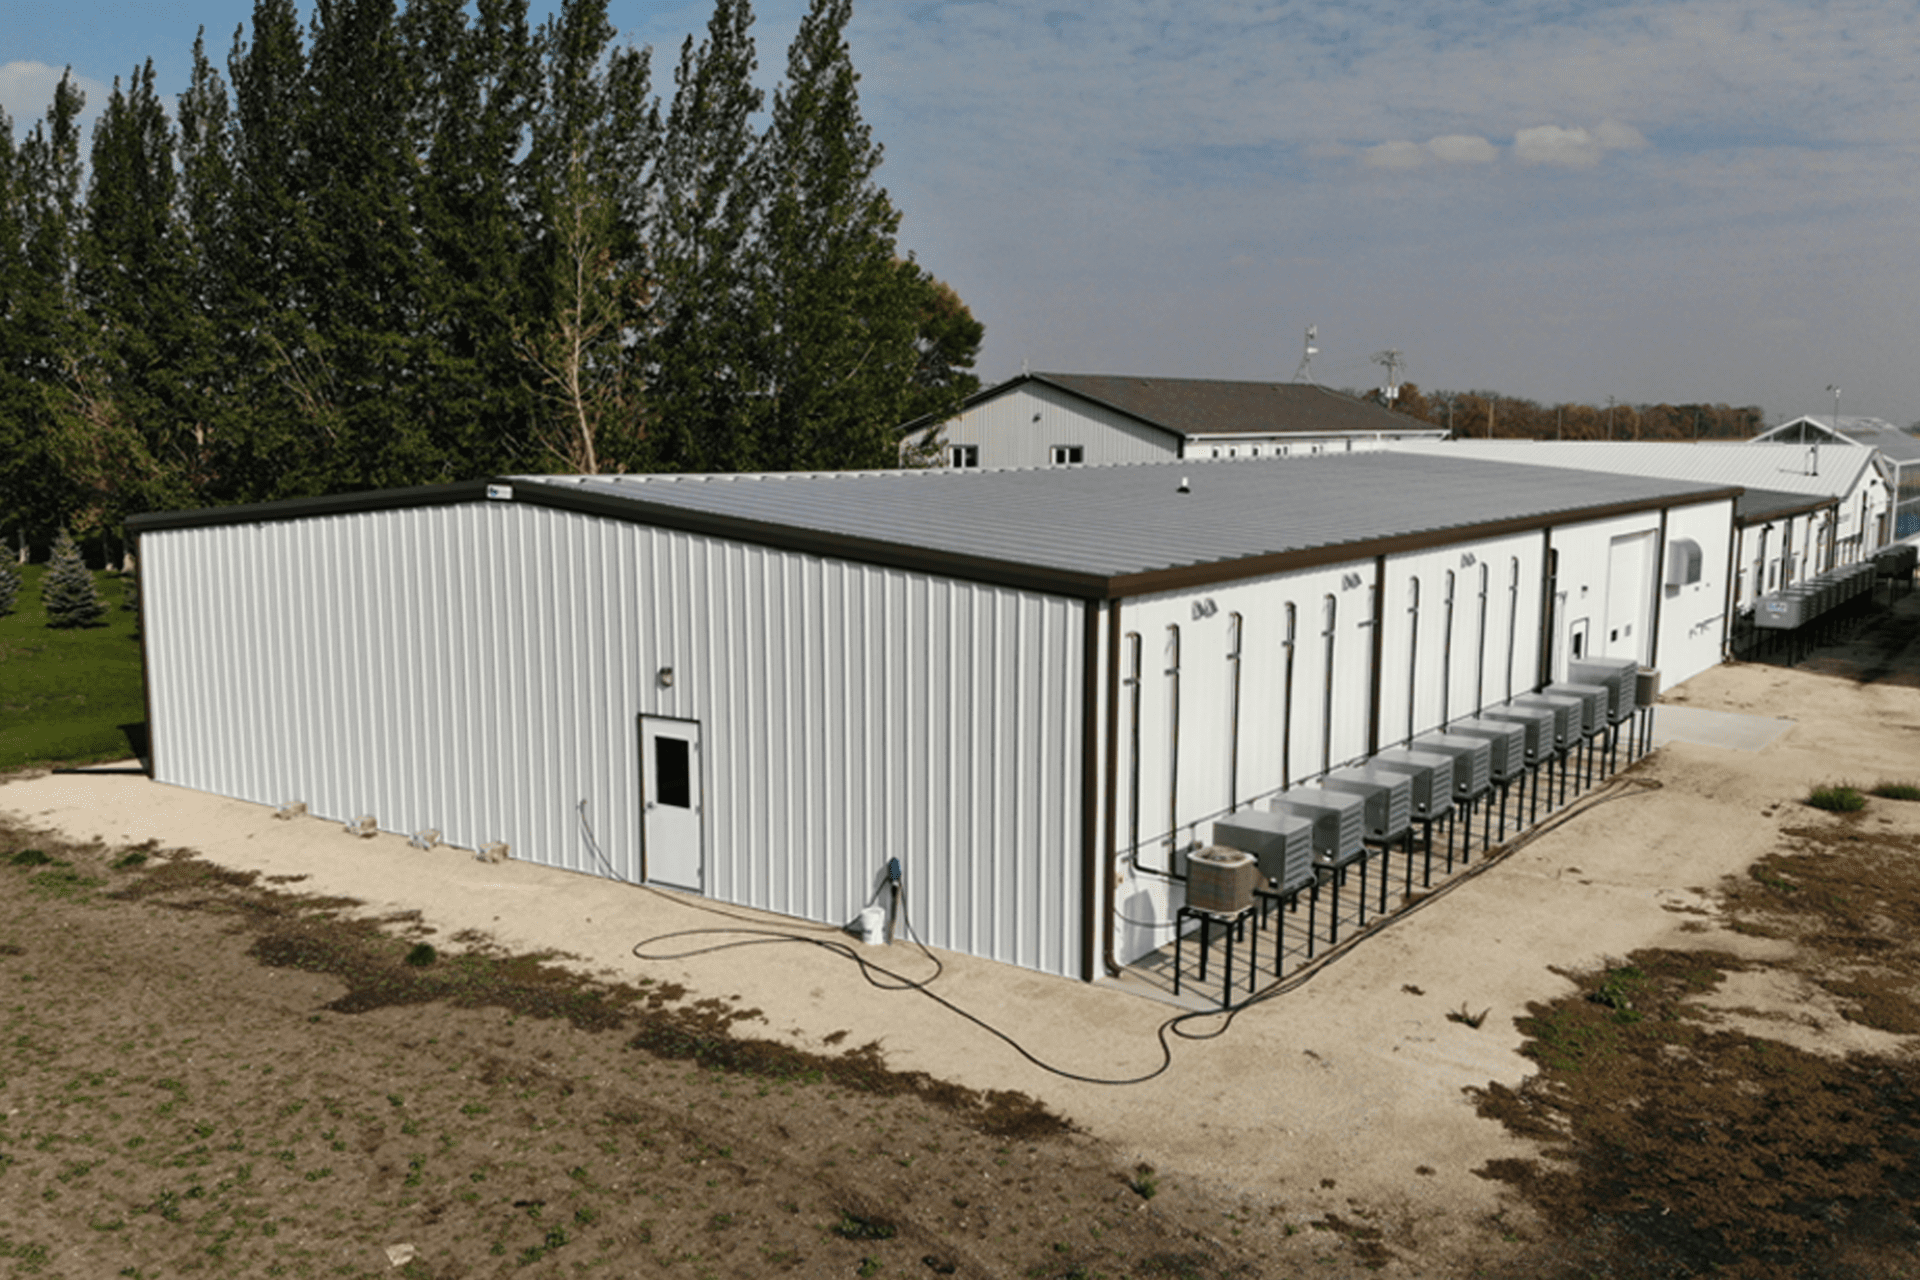 A pre-engineered steel growing facility with several fan units for ventilation